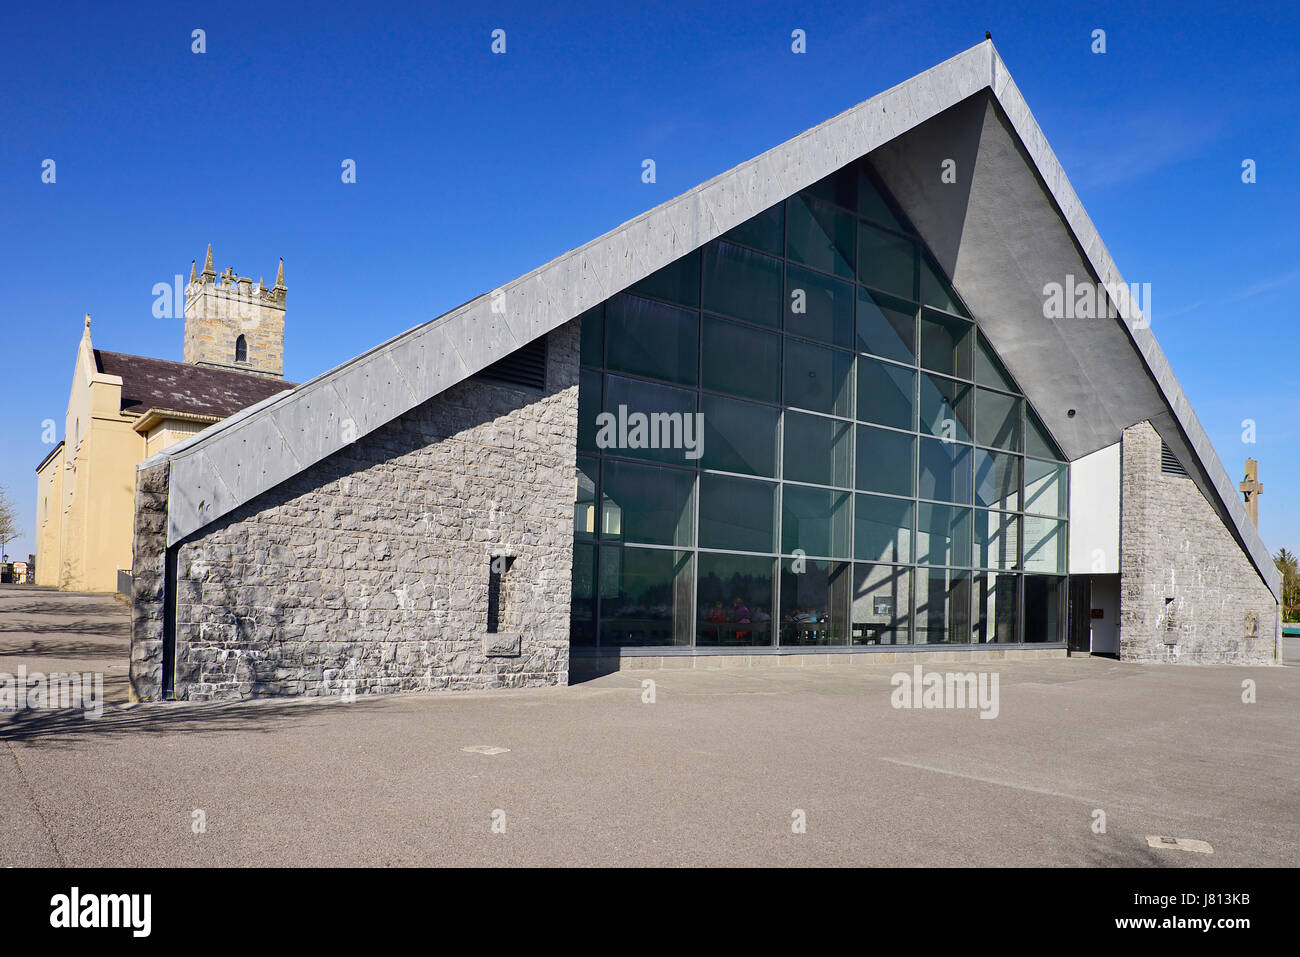 Ireland, County Mayo, Knock Shrine, Apparition Chapel with modern glass extension. Stock Photo